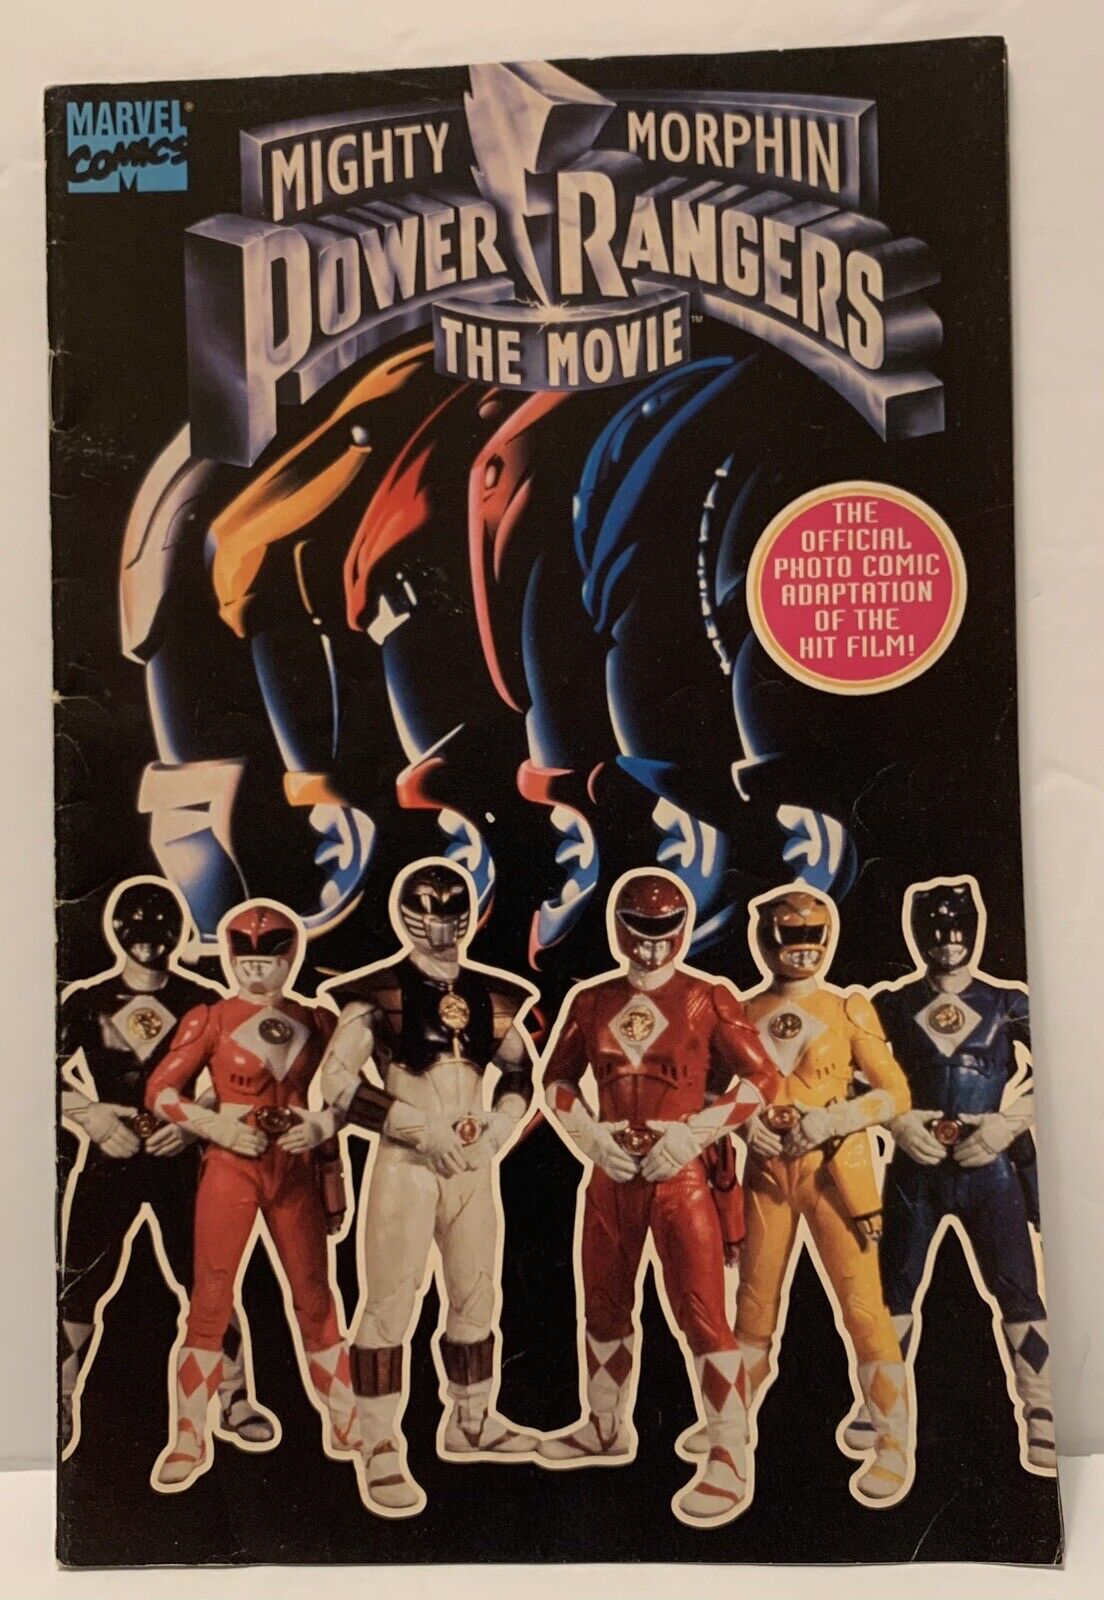 1995 Marvel Comics Mighty Morphin Power Rangers The Movie Official Photo Comic